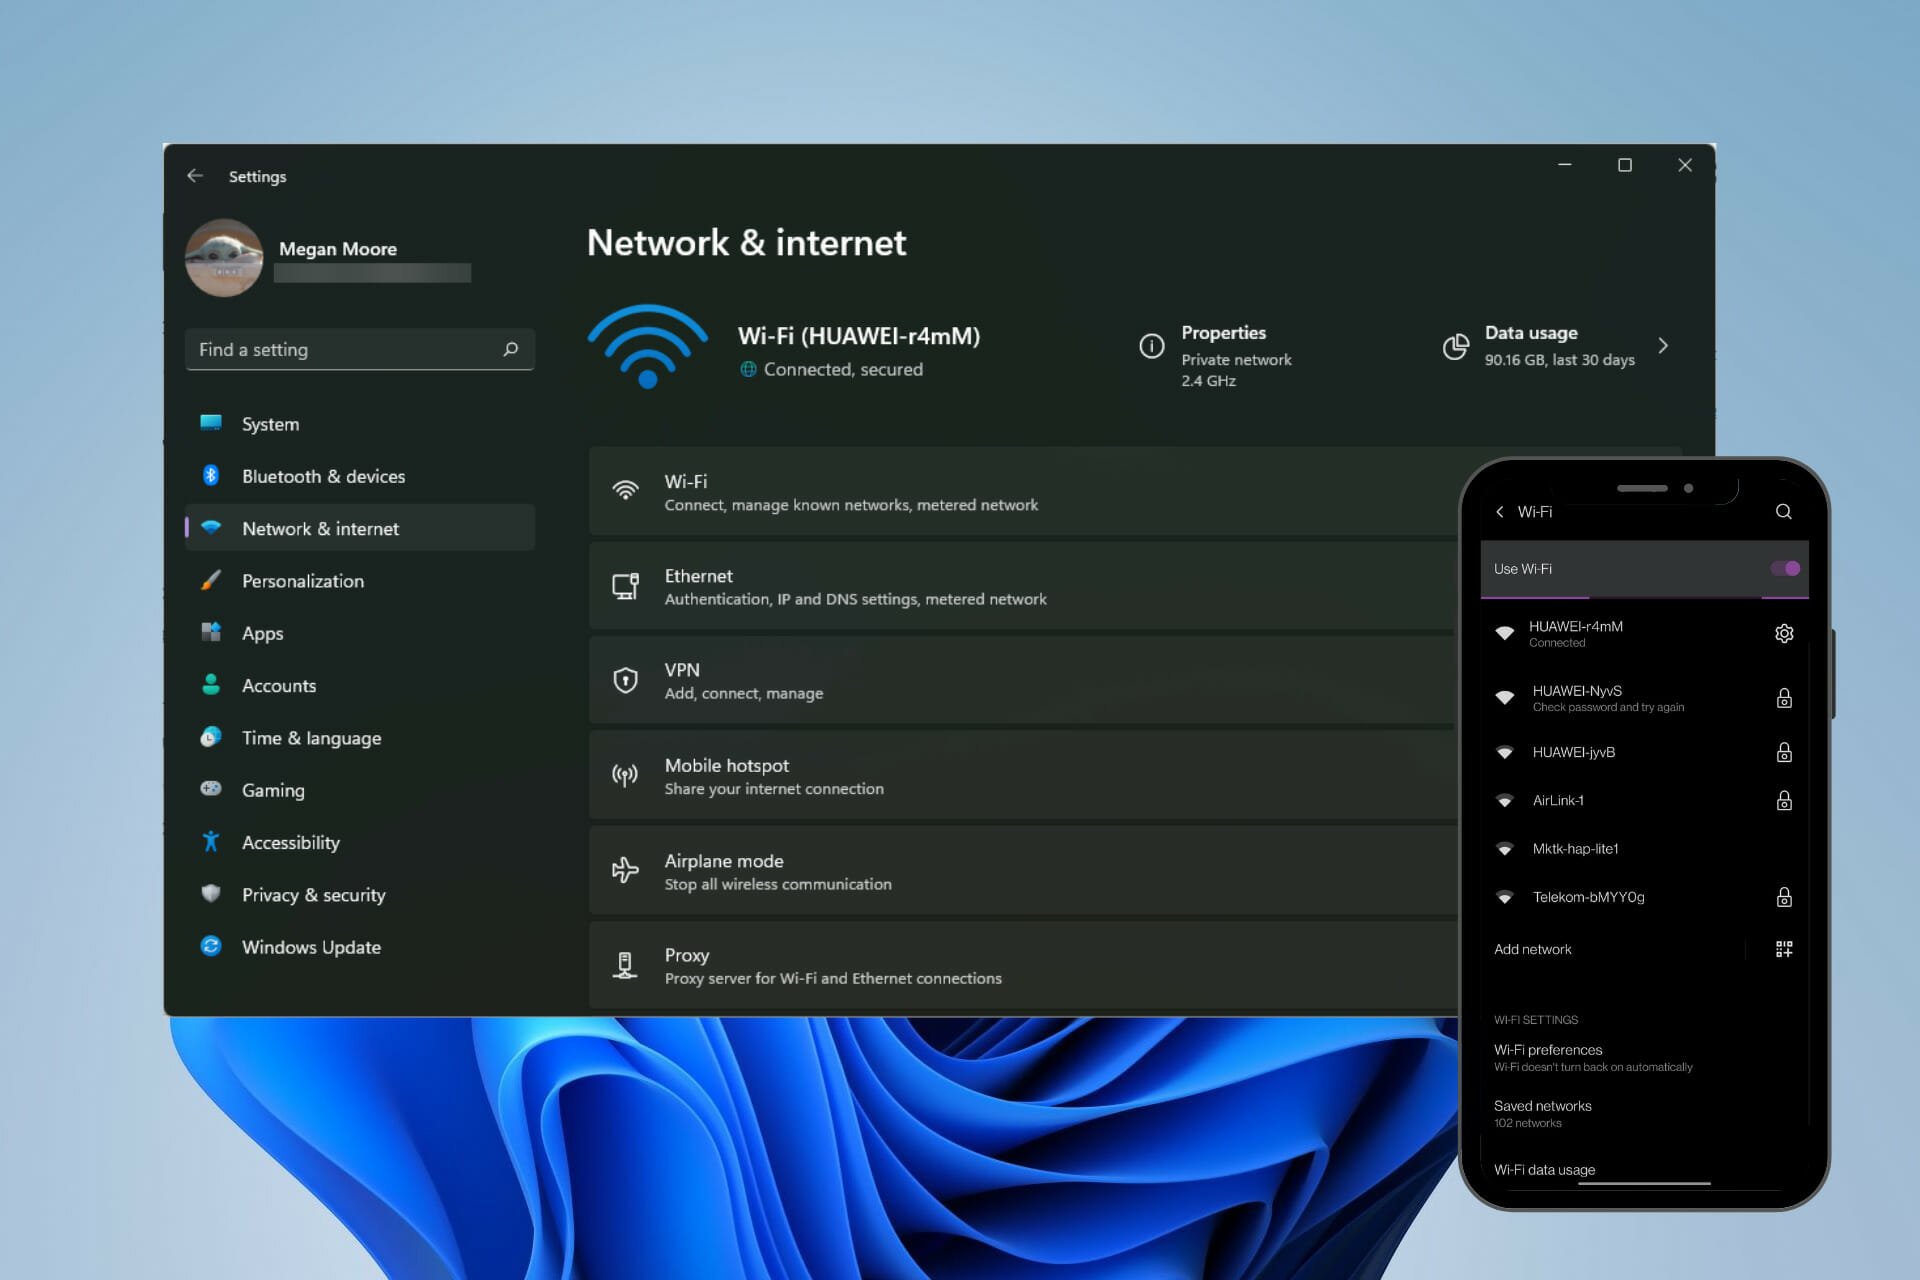 Connect to the same WIFI and network.